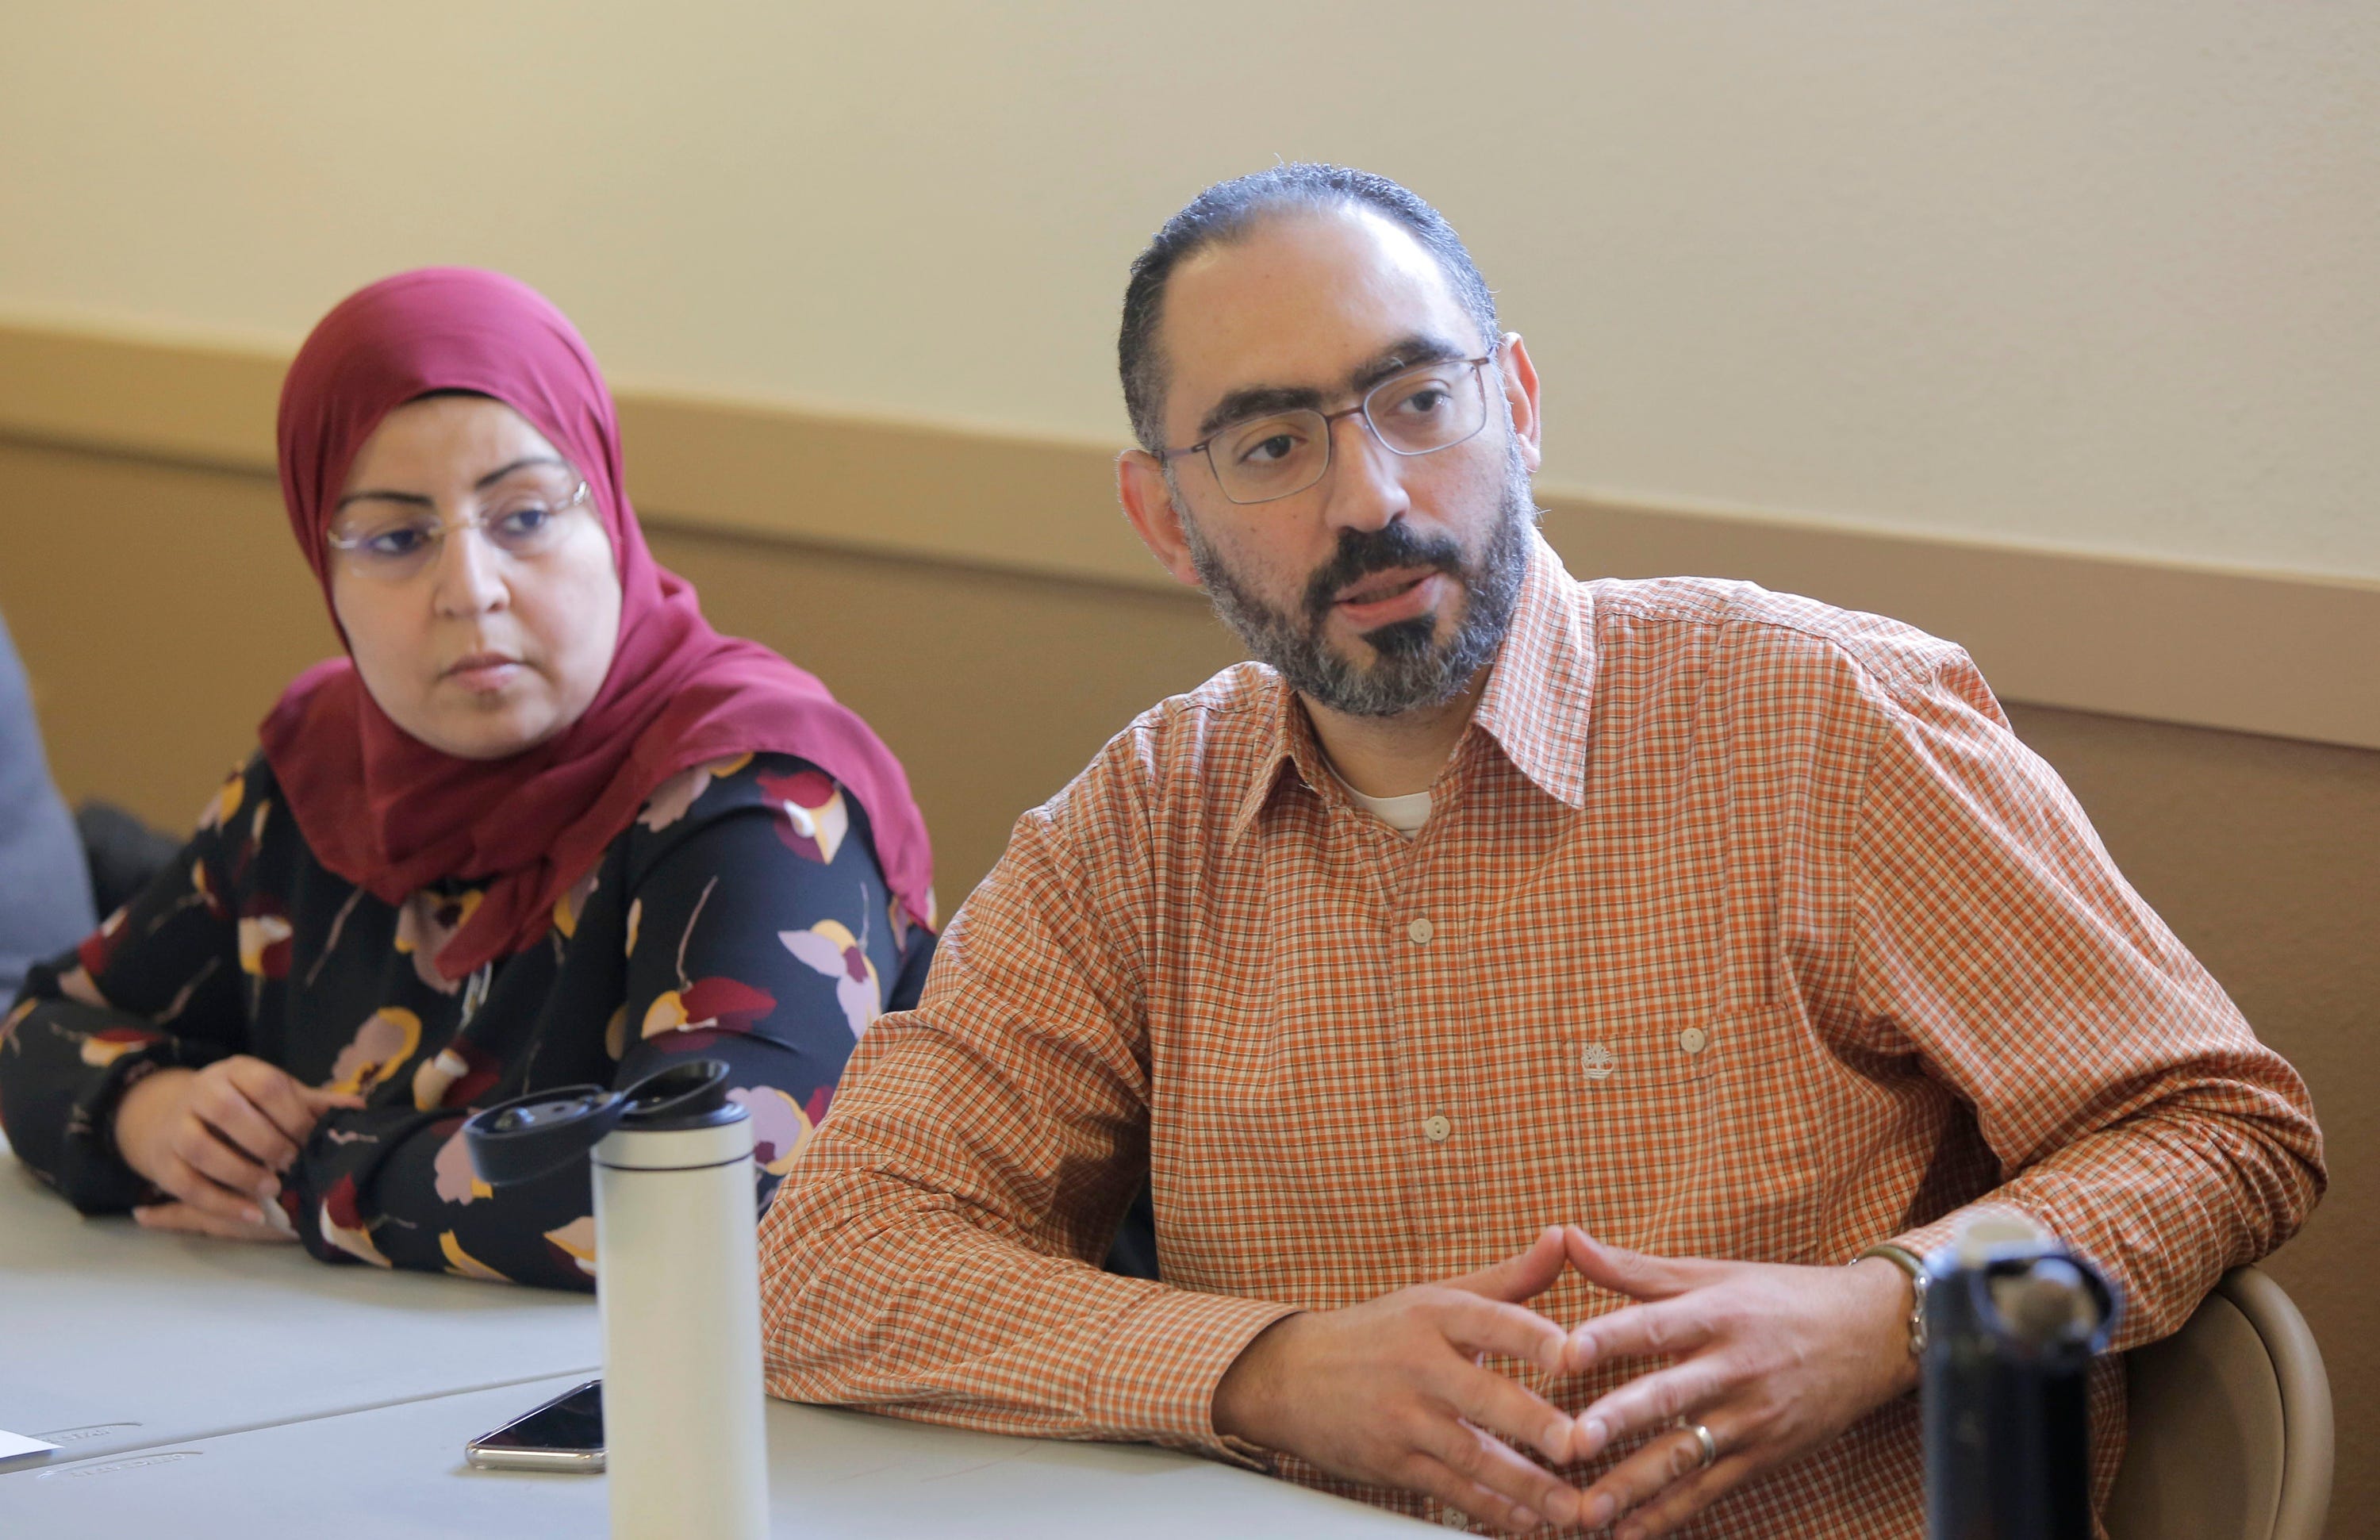 Ahmed and Dalia Abdelnaby attend the Interfaith Sack Lunch Conversation event at the Islamic Center of Boise on  February 27th, 2019. Ahmed and Dalia have been vocal opponents of the so-called Anti-Sharia law bills.